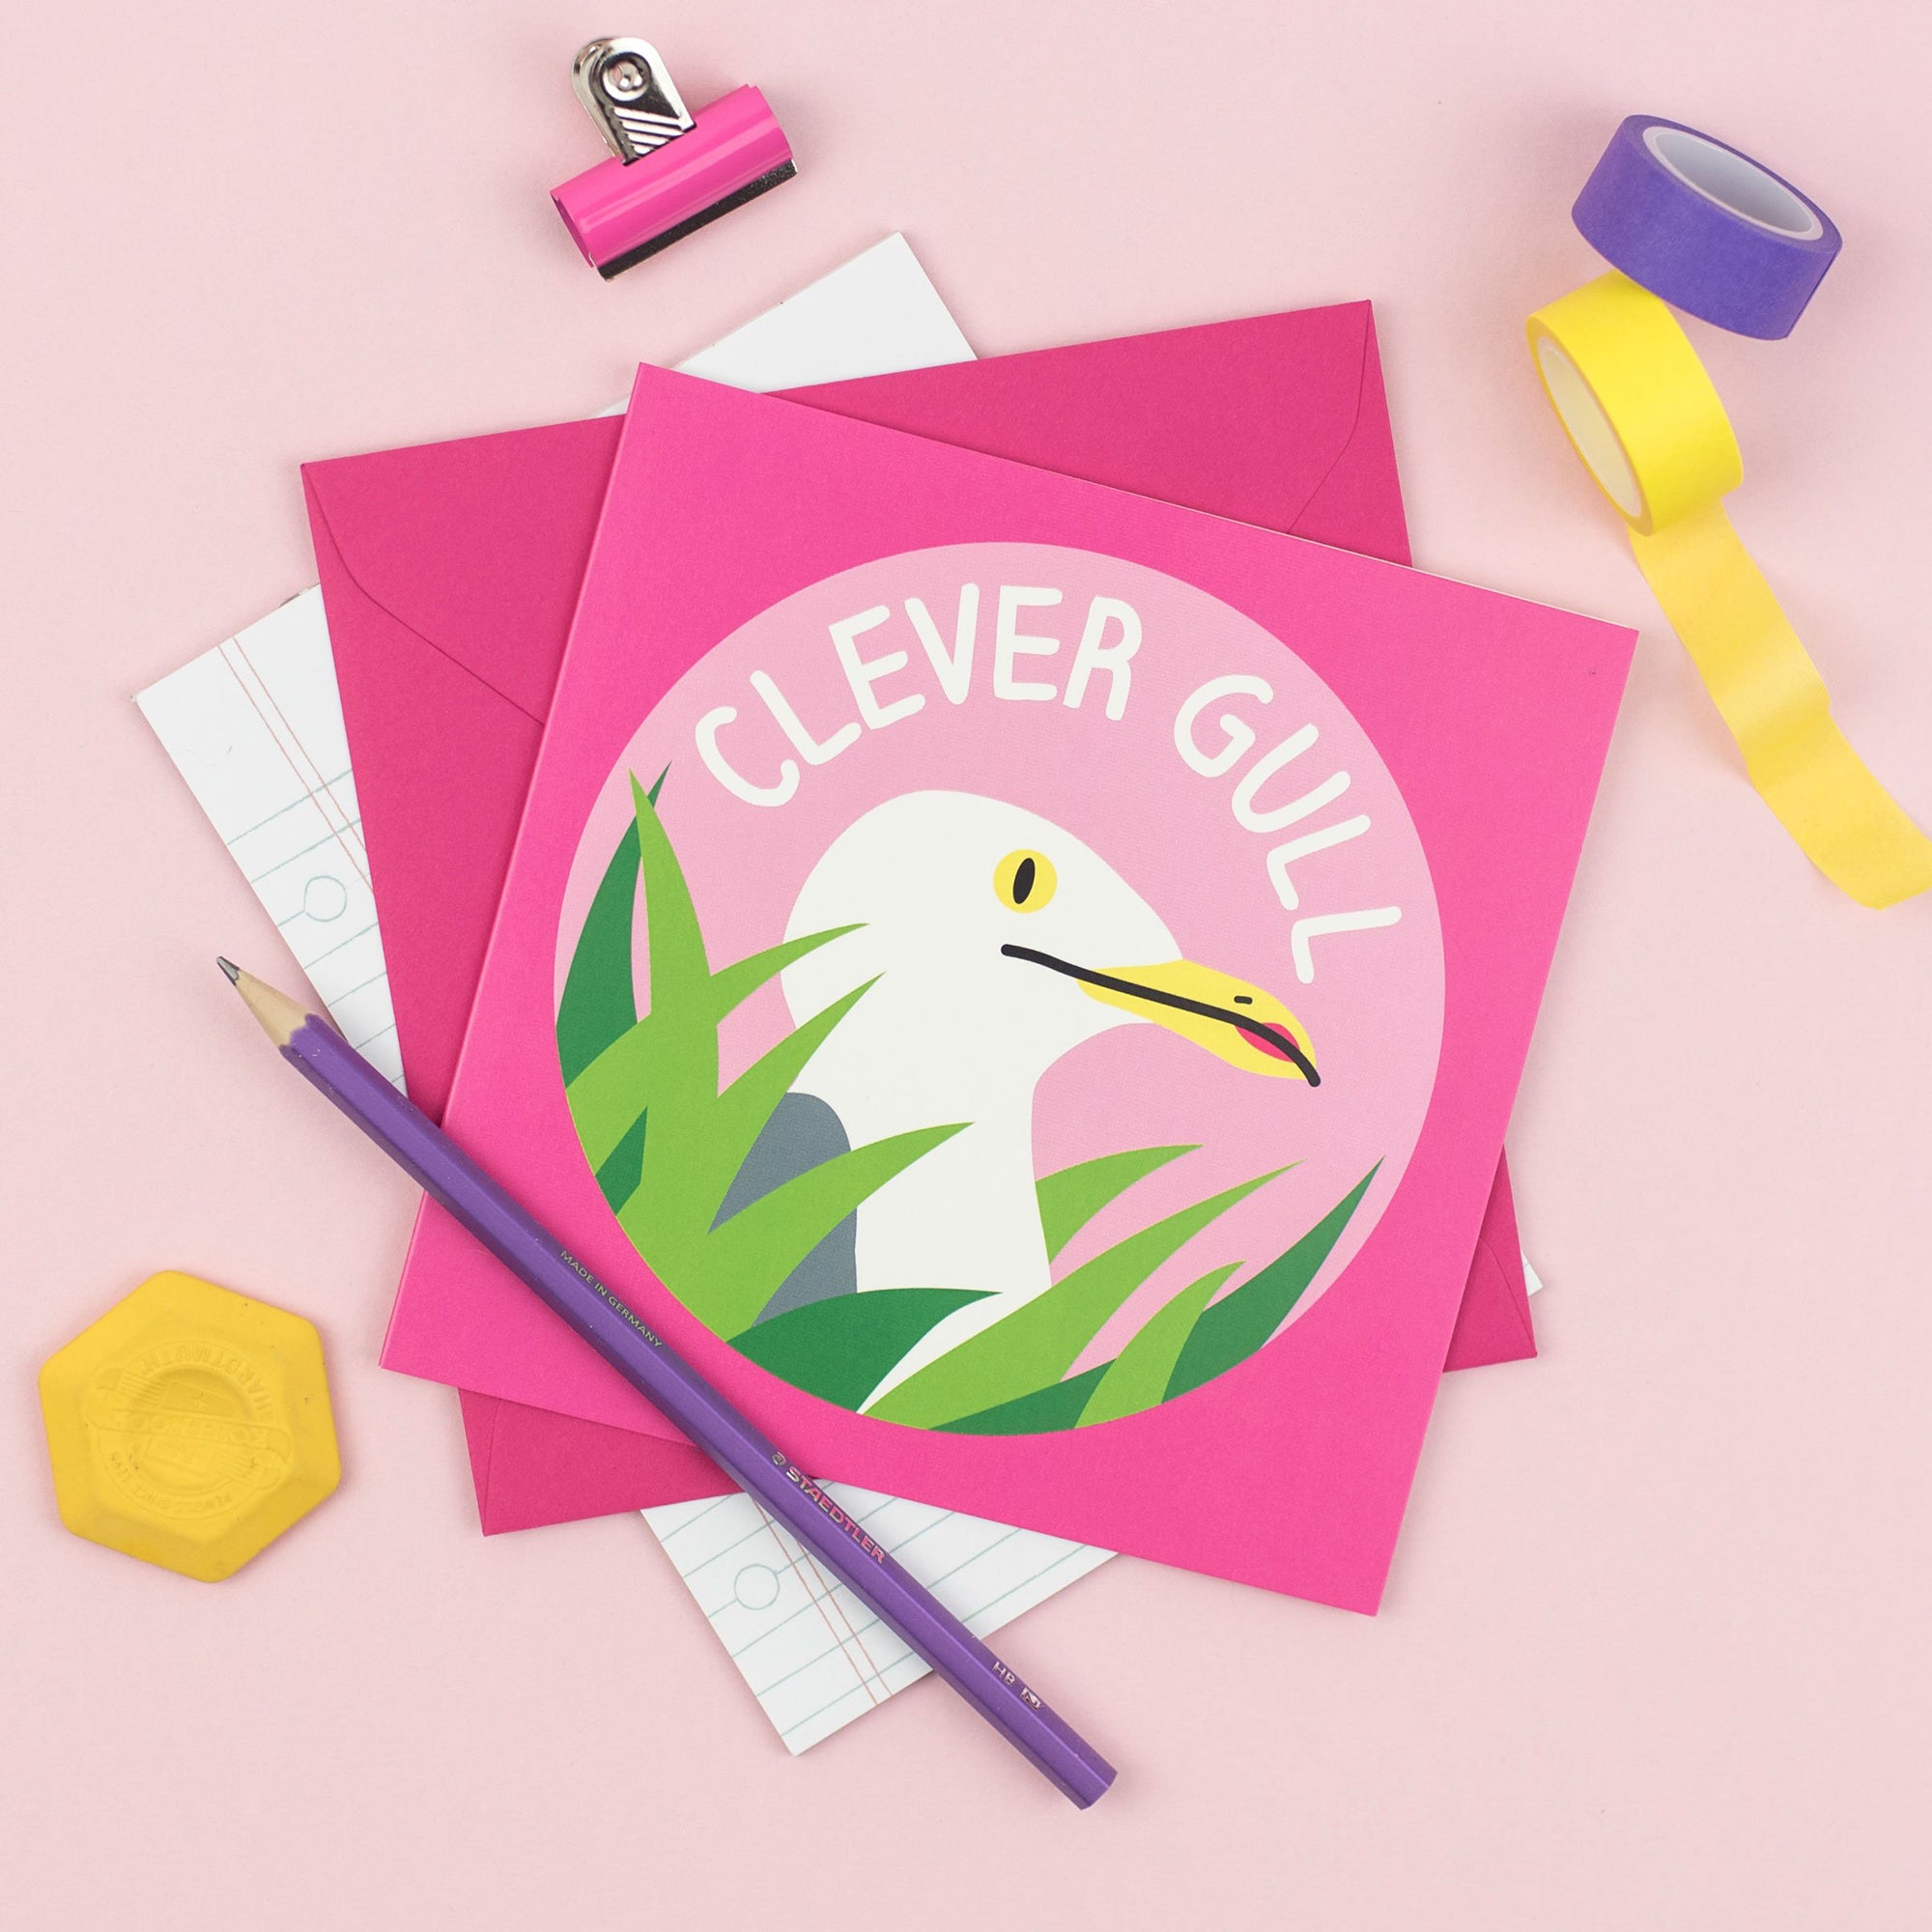 Clever Gull greetings card